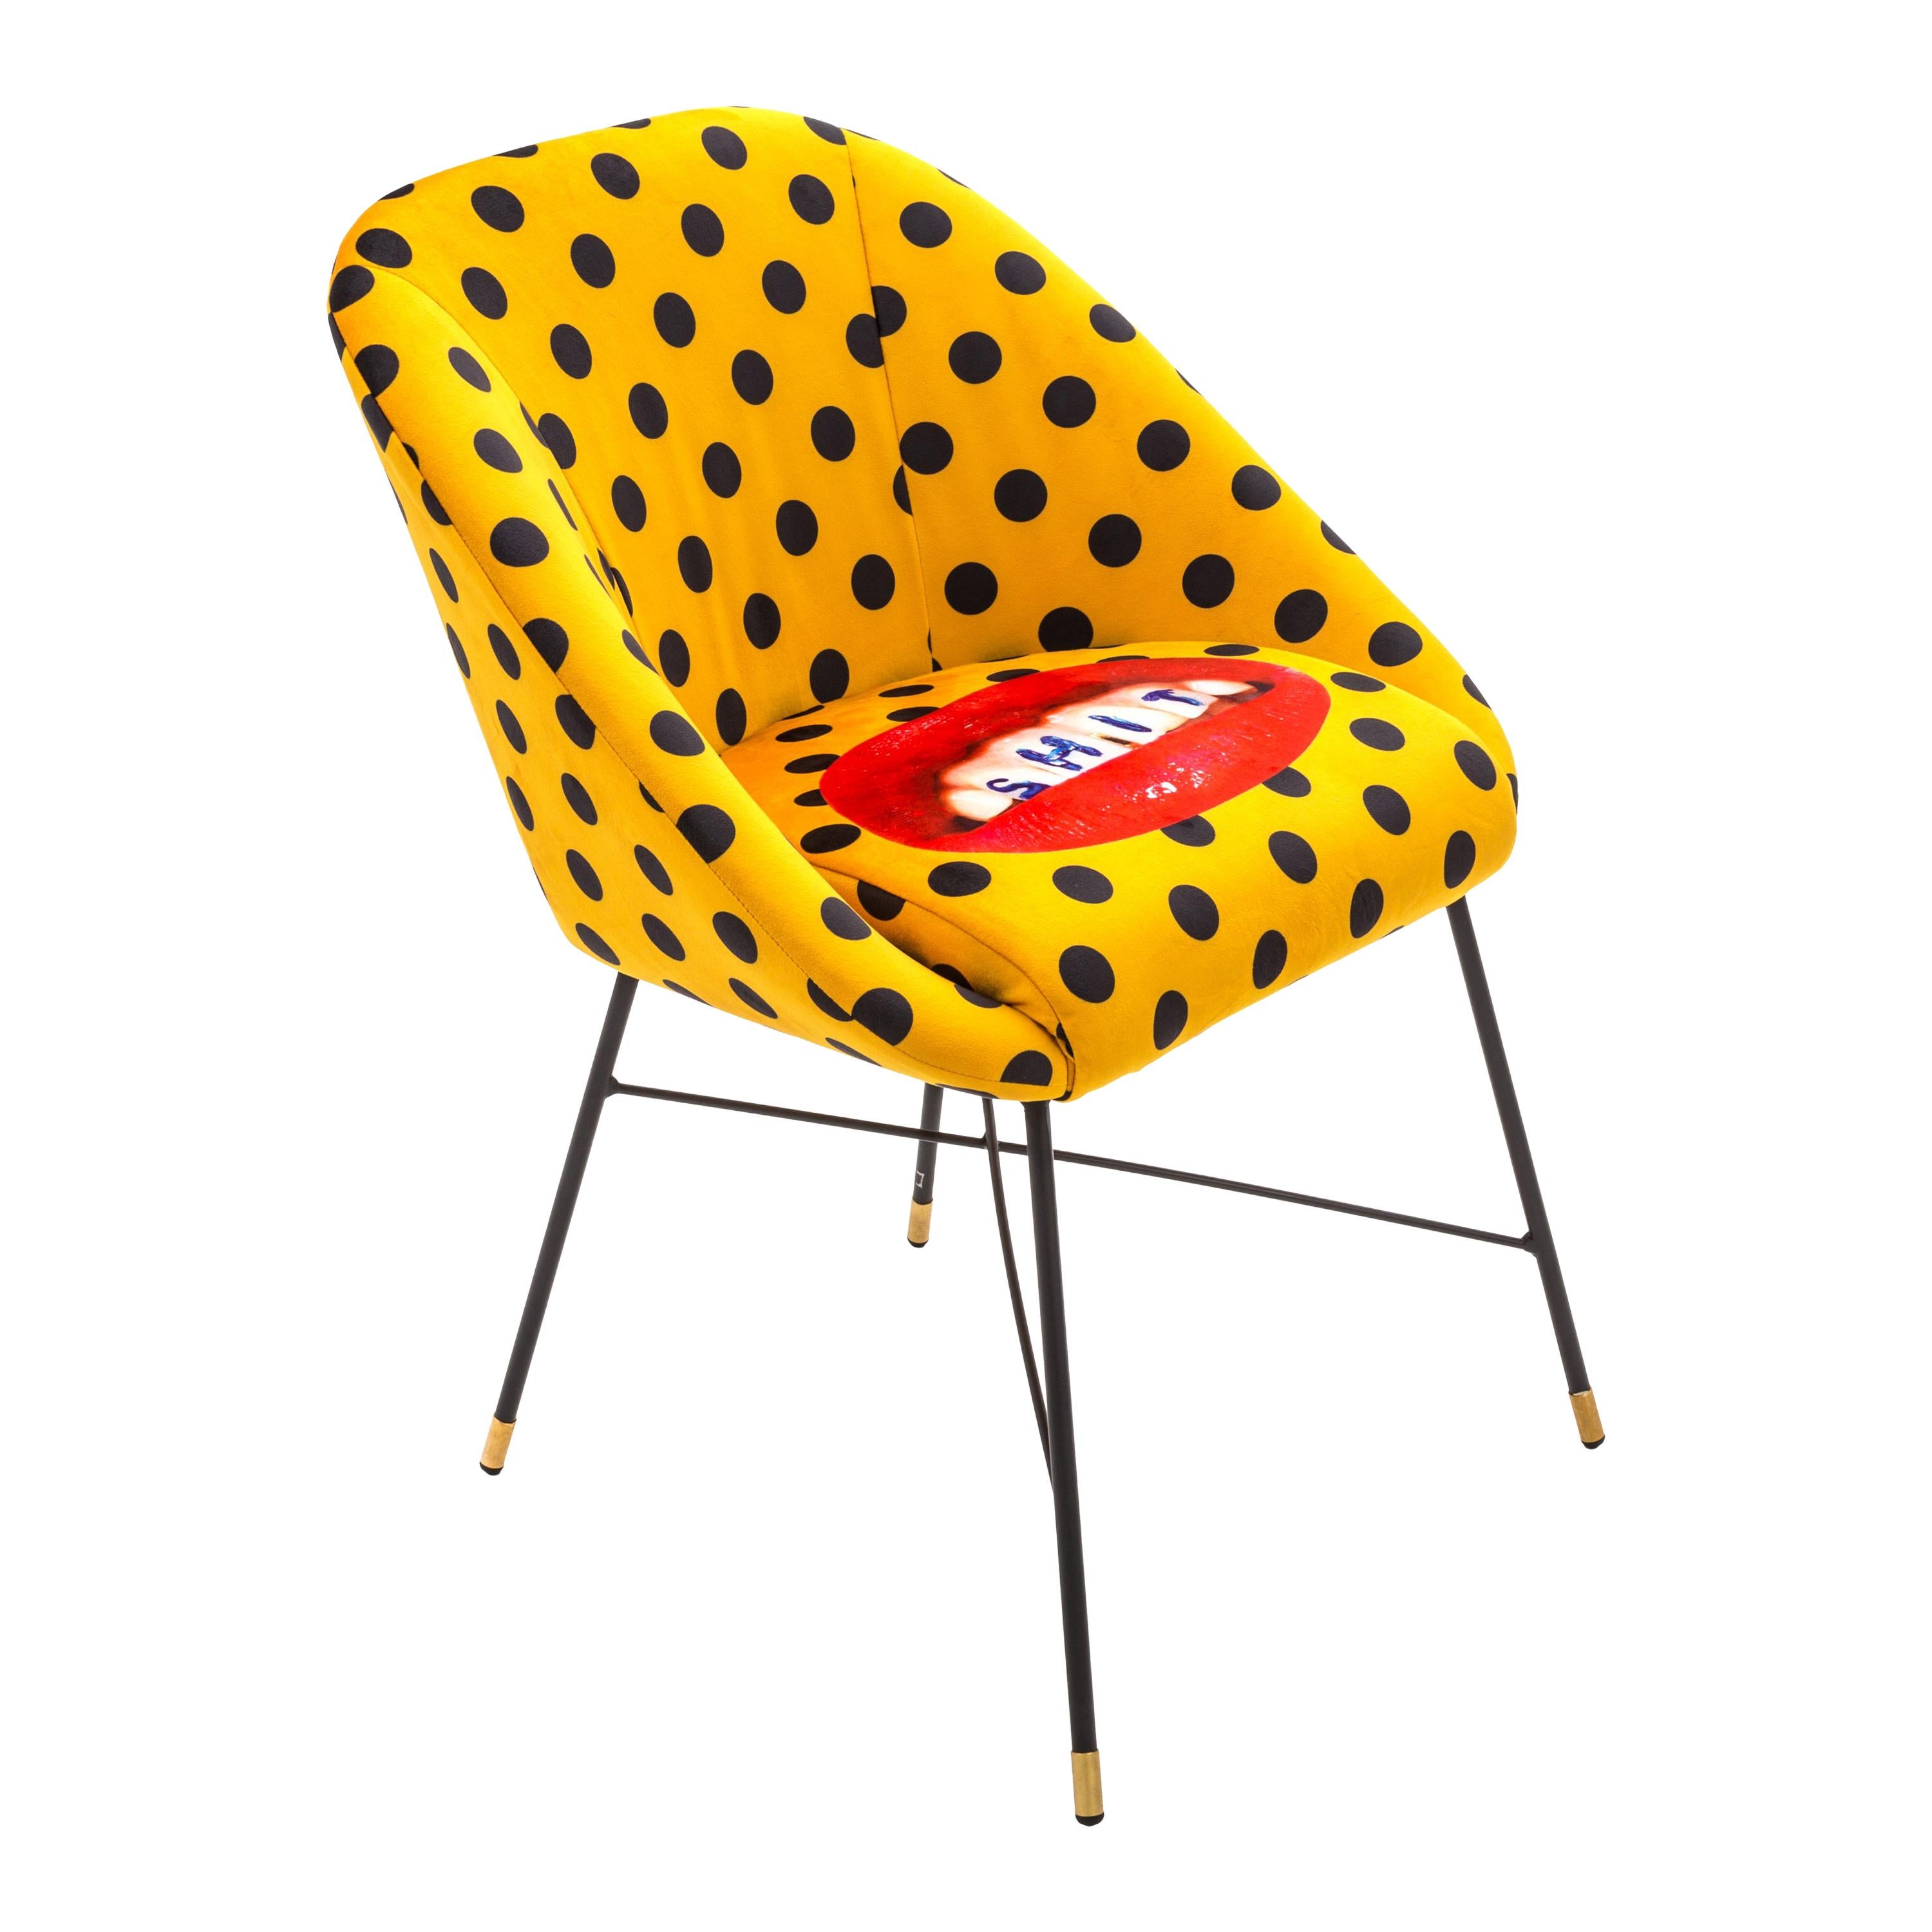 Seletti "Shit" Upholstered Occasional Chair by Toiletpaper